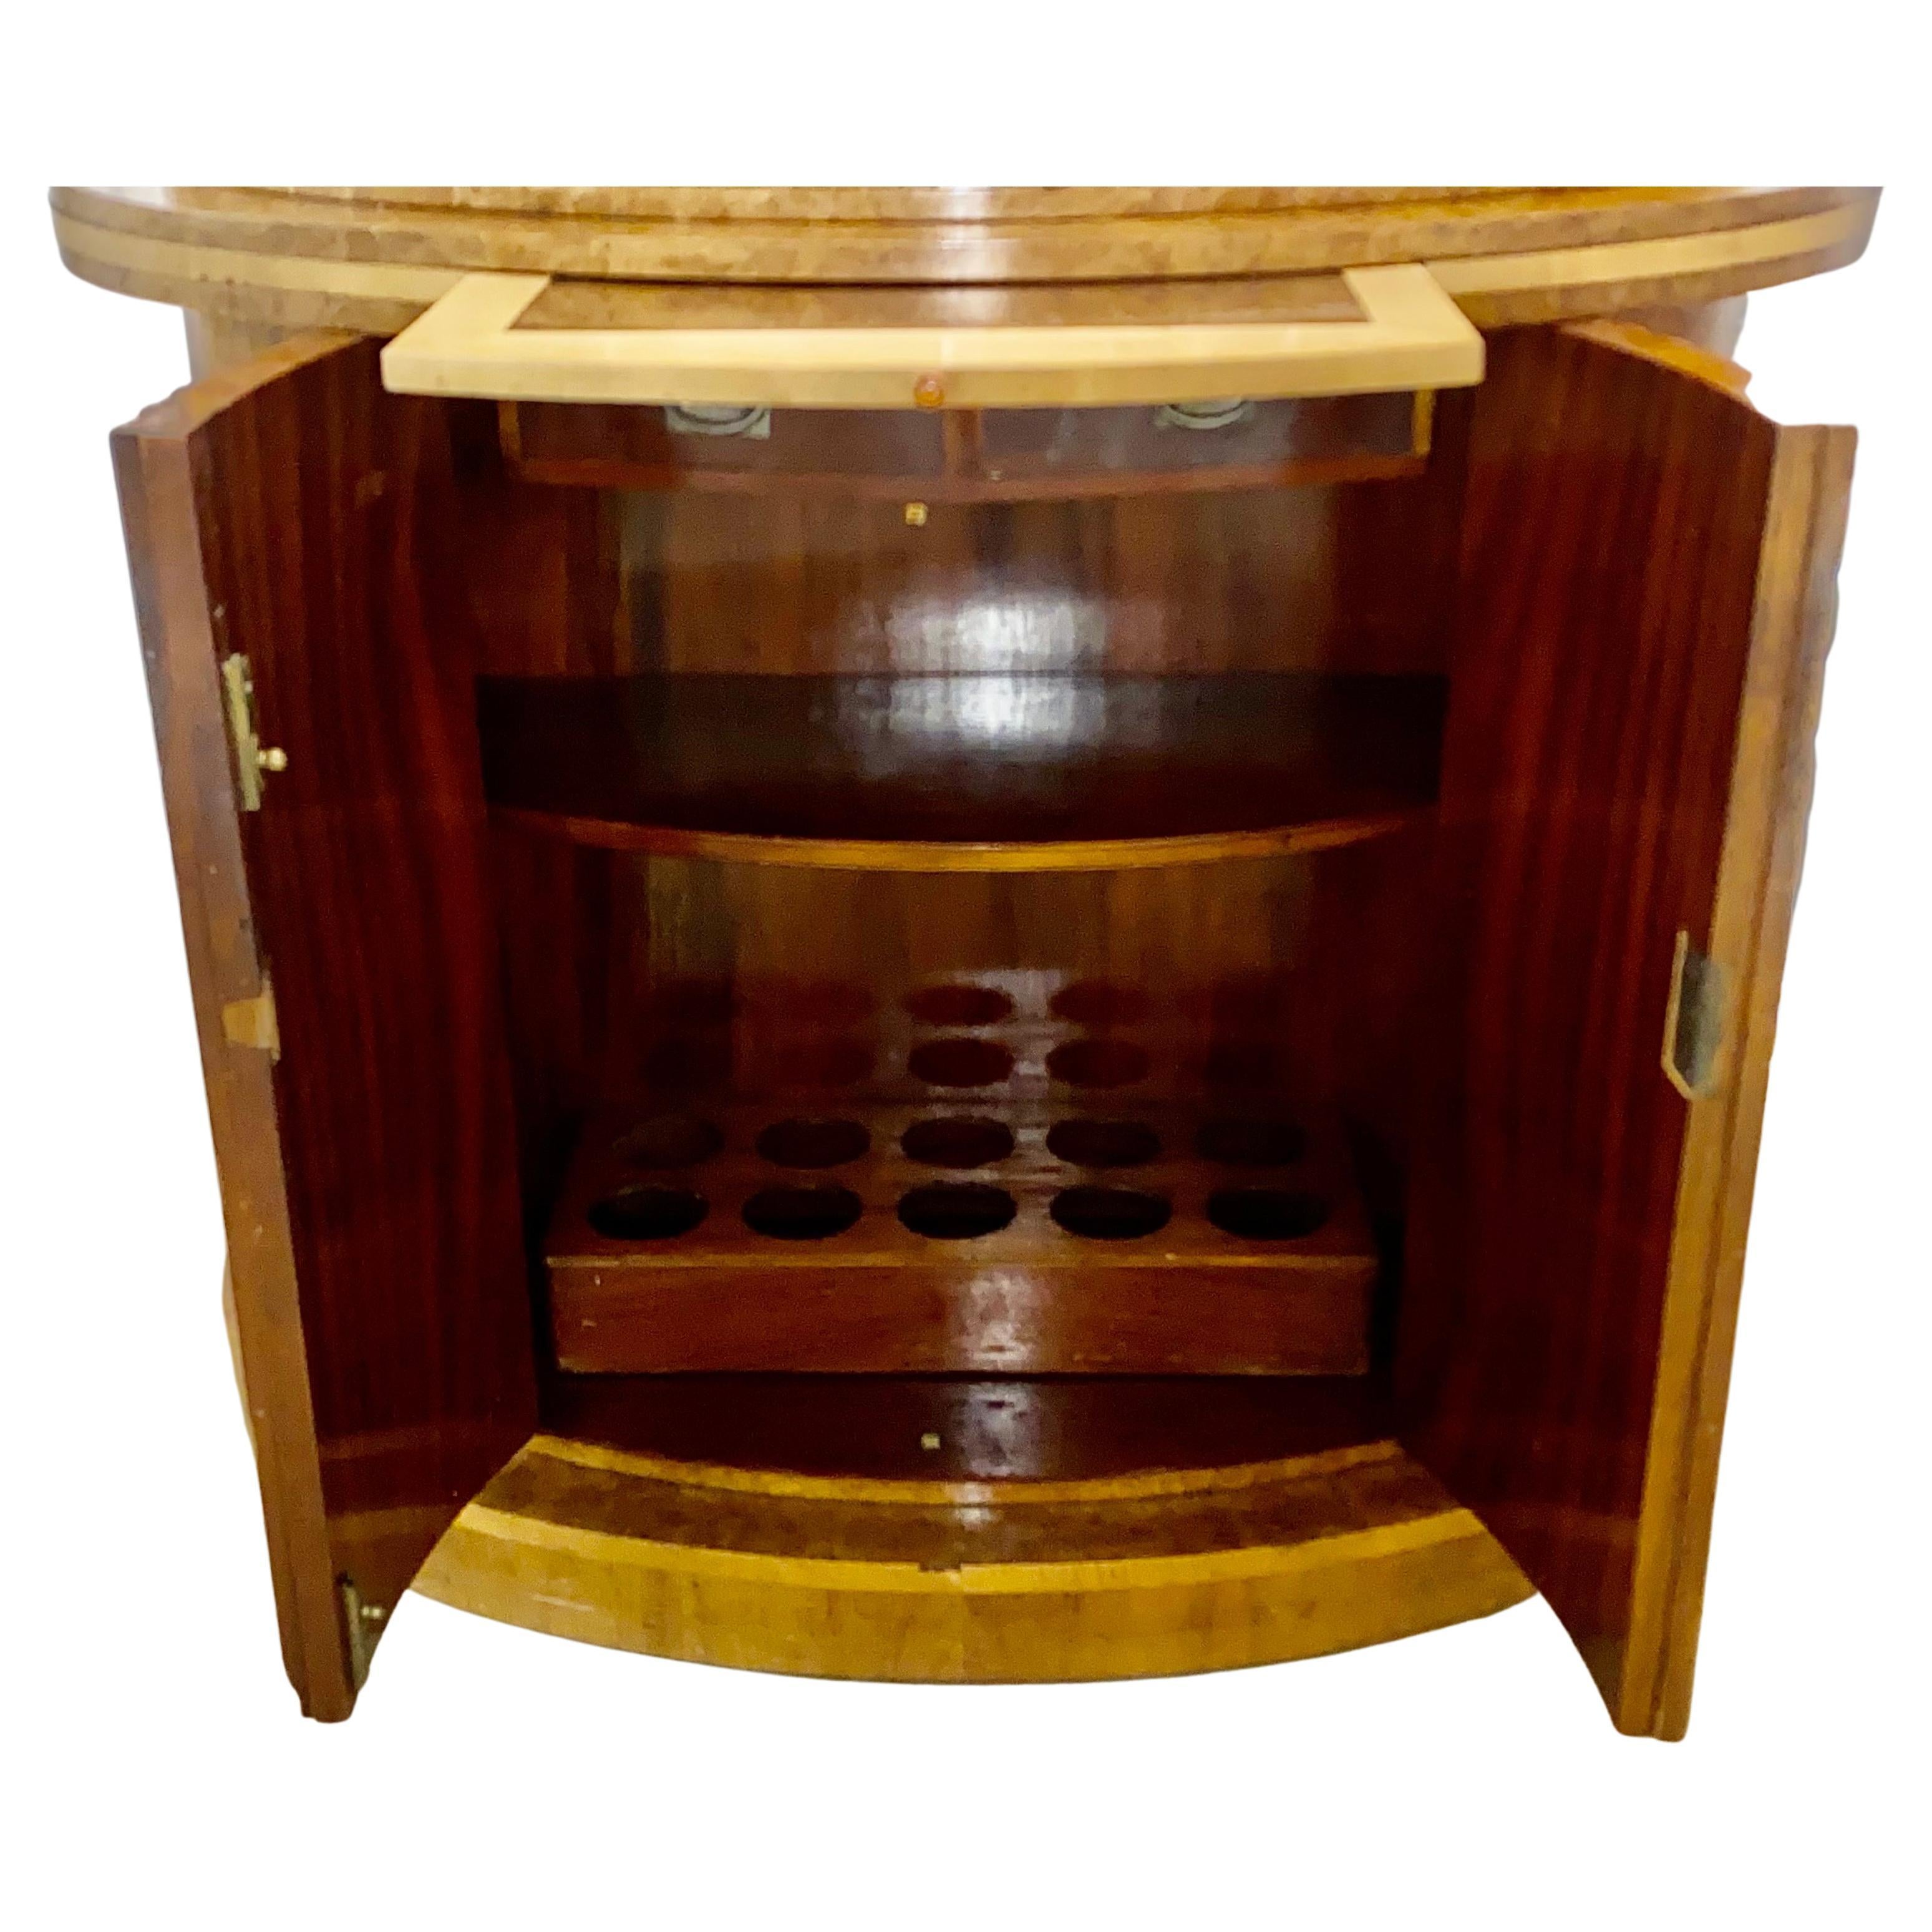  Art Deco Blonde Burl Maple Semi Circular Cocktail Cabinet Bar by H&L Epstein  For Sale 1